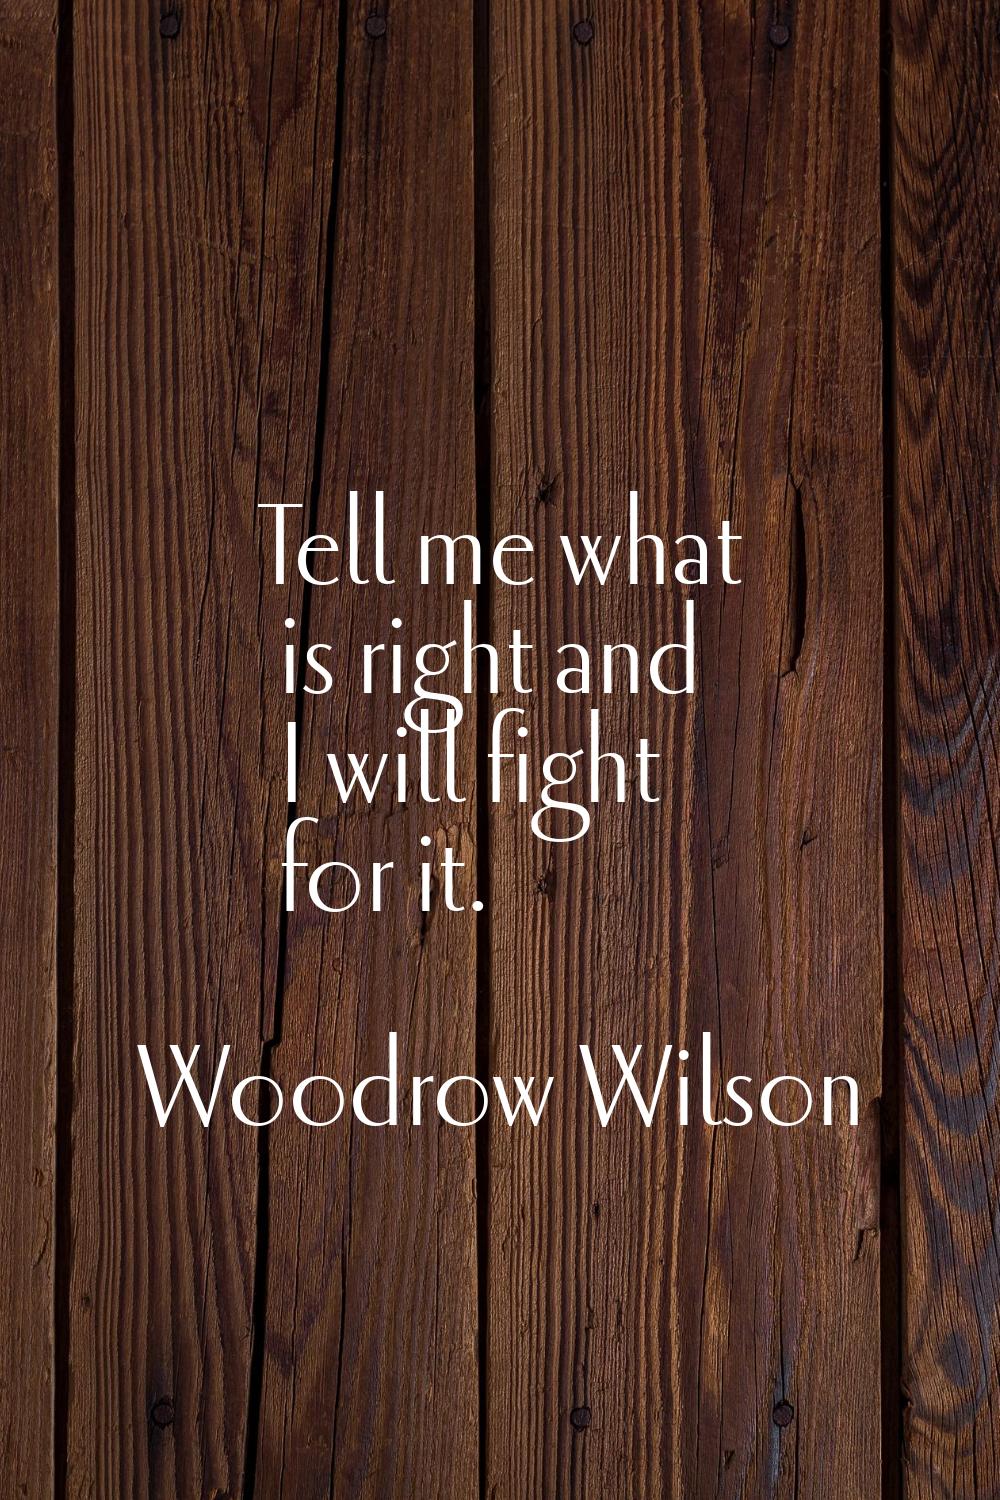 Tell me what is right and I will fight for it.